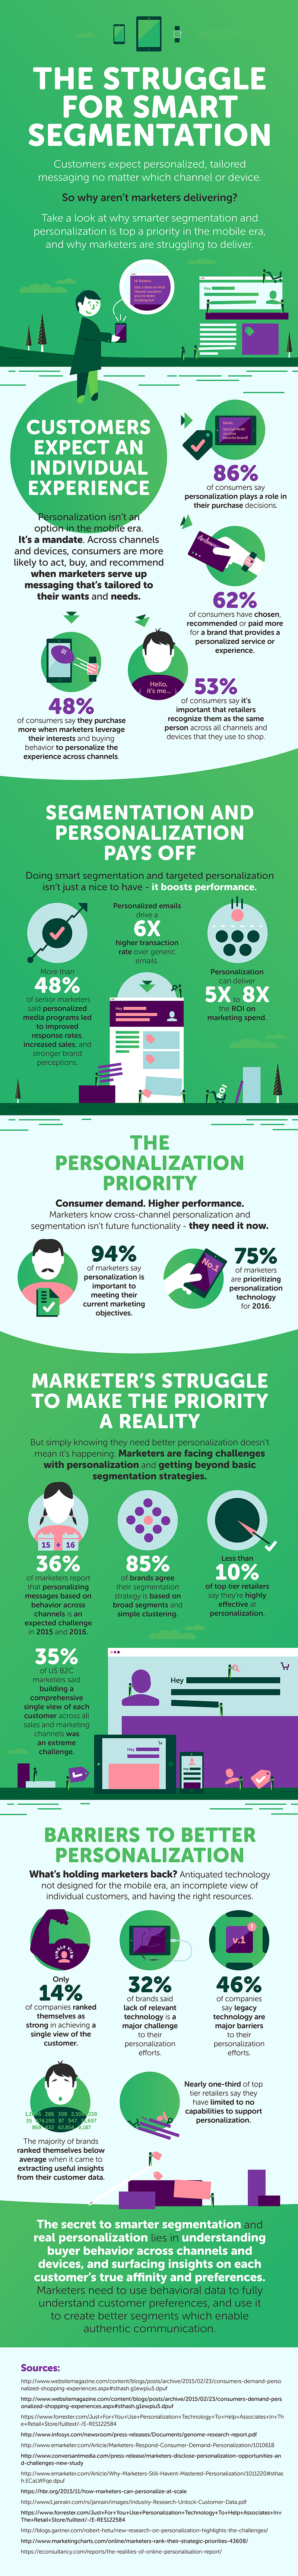 Customers expect personalized, tailored messaging no matter which channel or electronic device they may be using.